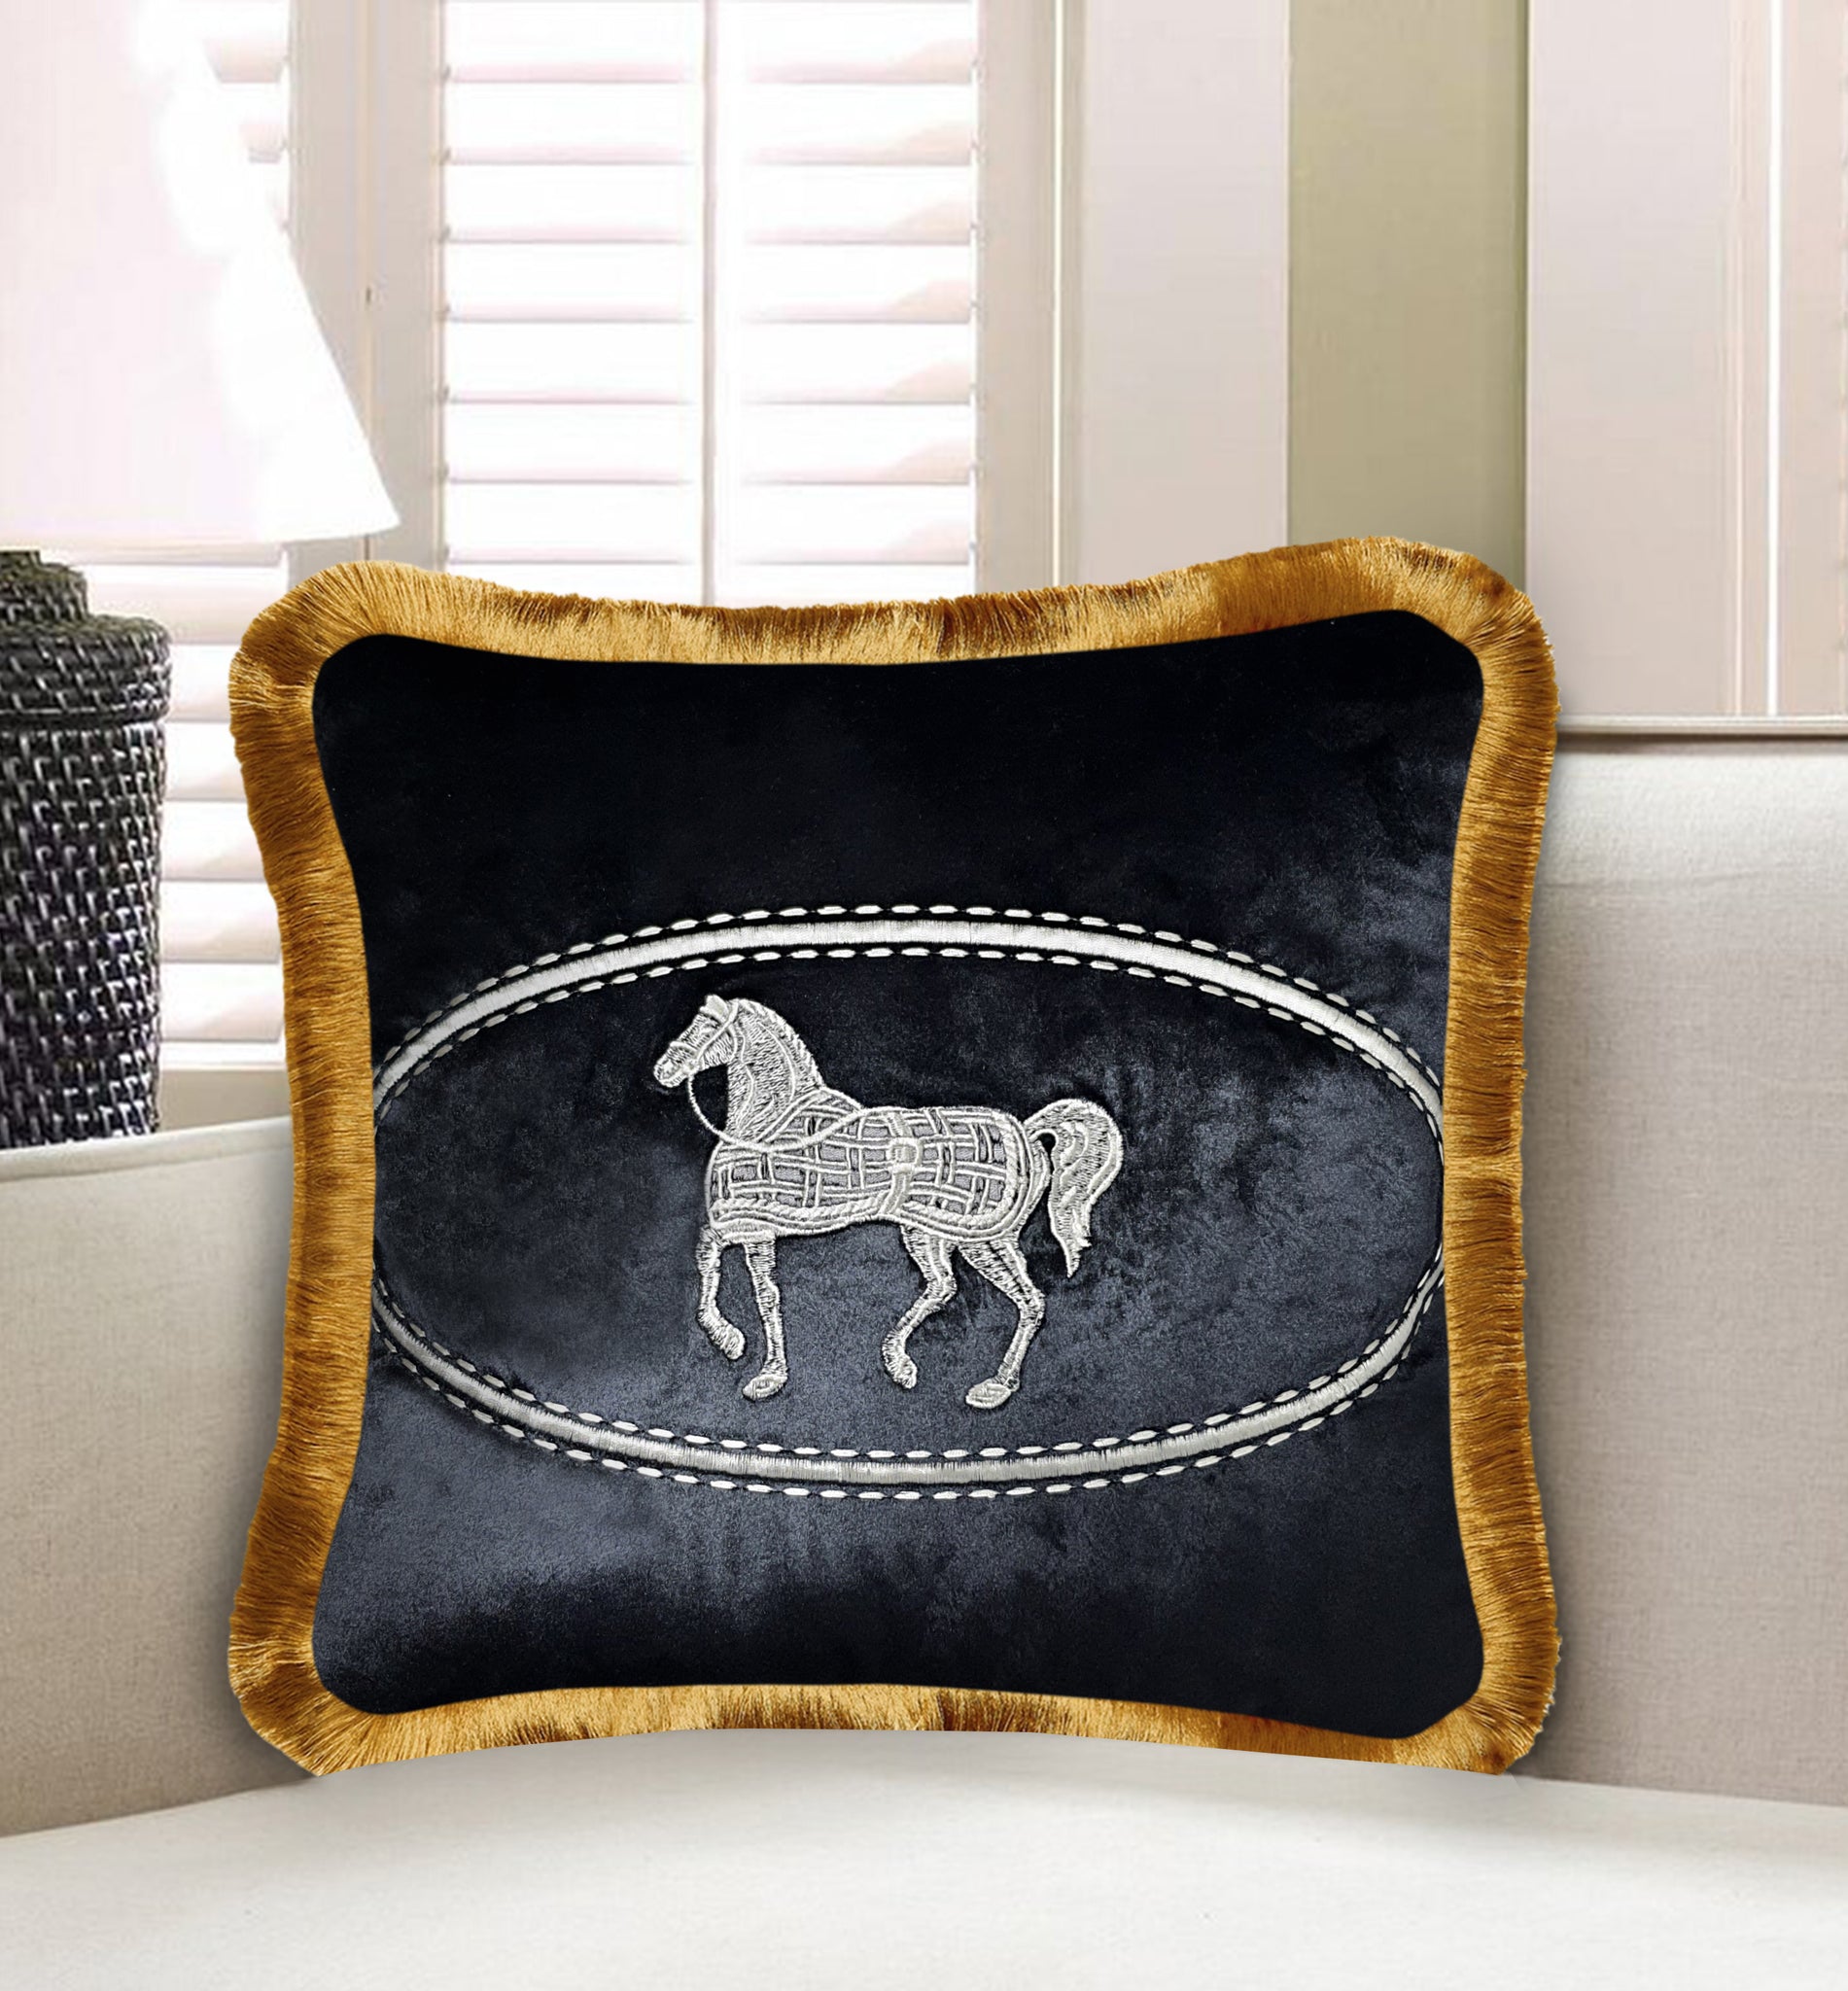 Velvet Embroidered Pony Cushion Cover, Classic Horse Decorative Pillowcase, Home Decor Throw Pillow with Fringe for Bedroom, Living Room, 45x45 cm 18x18 In ,